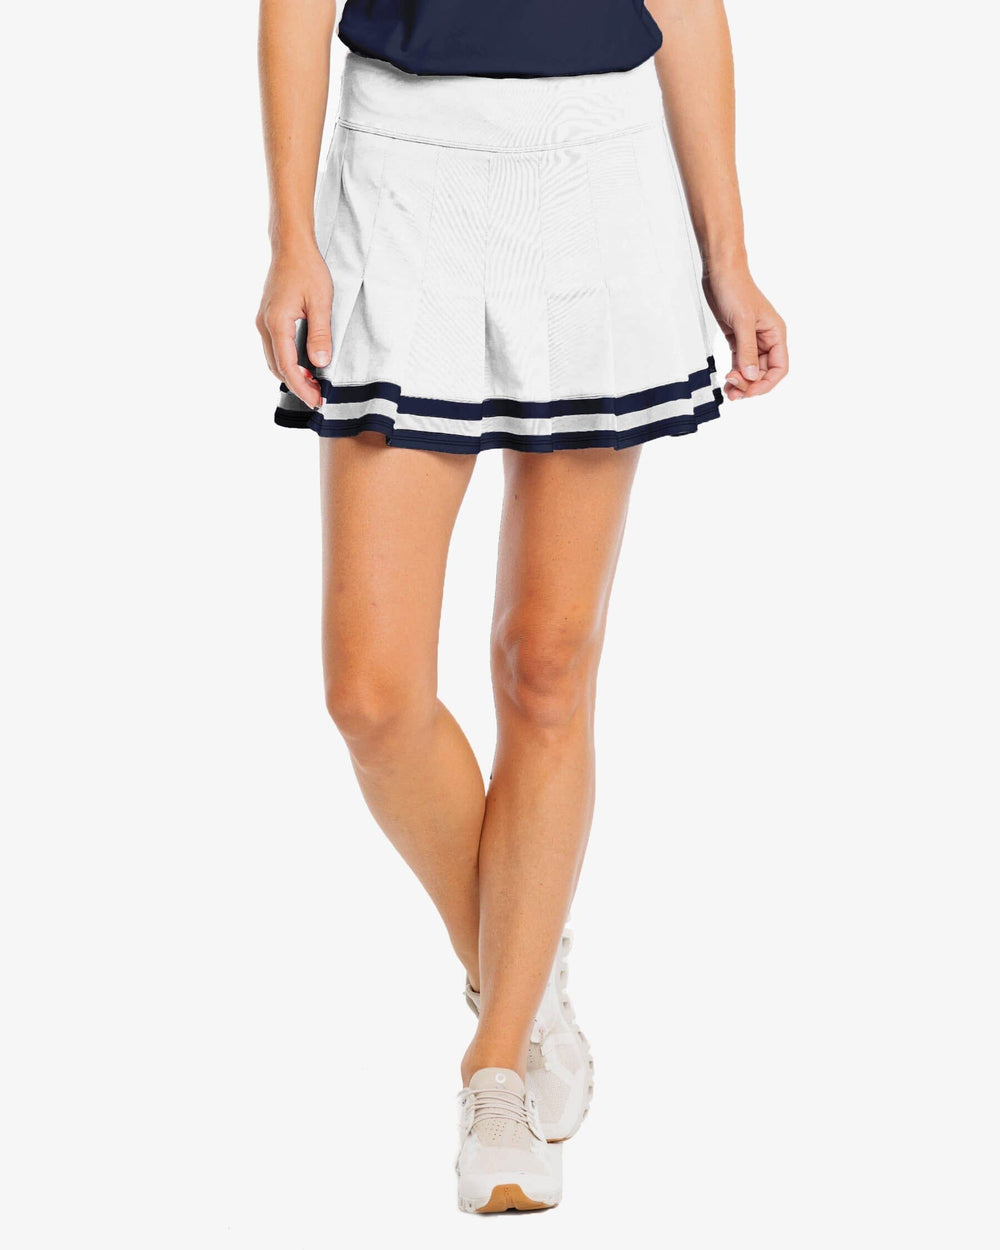 The front view of the Southern Tide Gwen Pleated Performance Skort by Southern Tide - Classic White